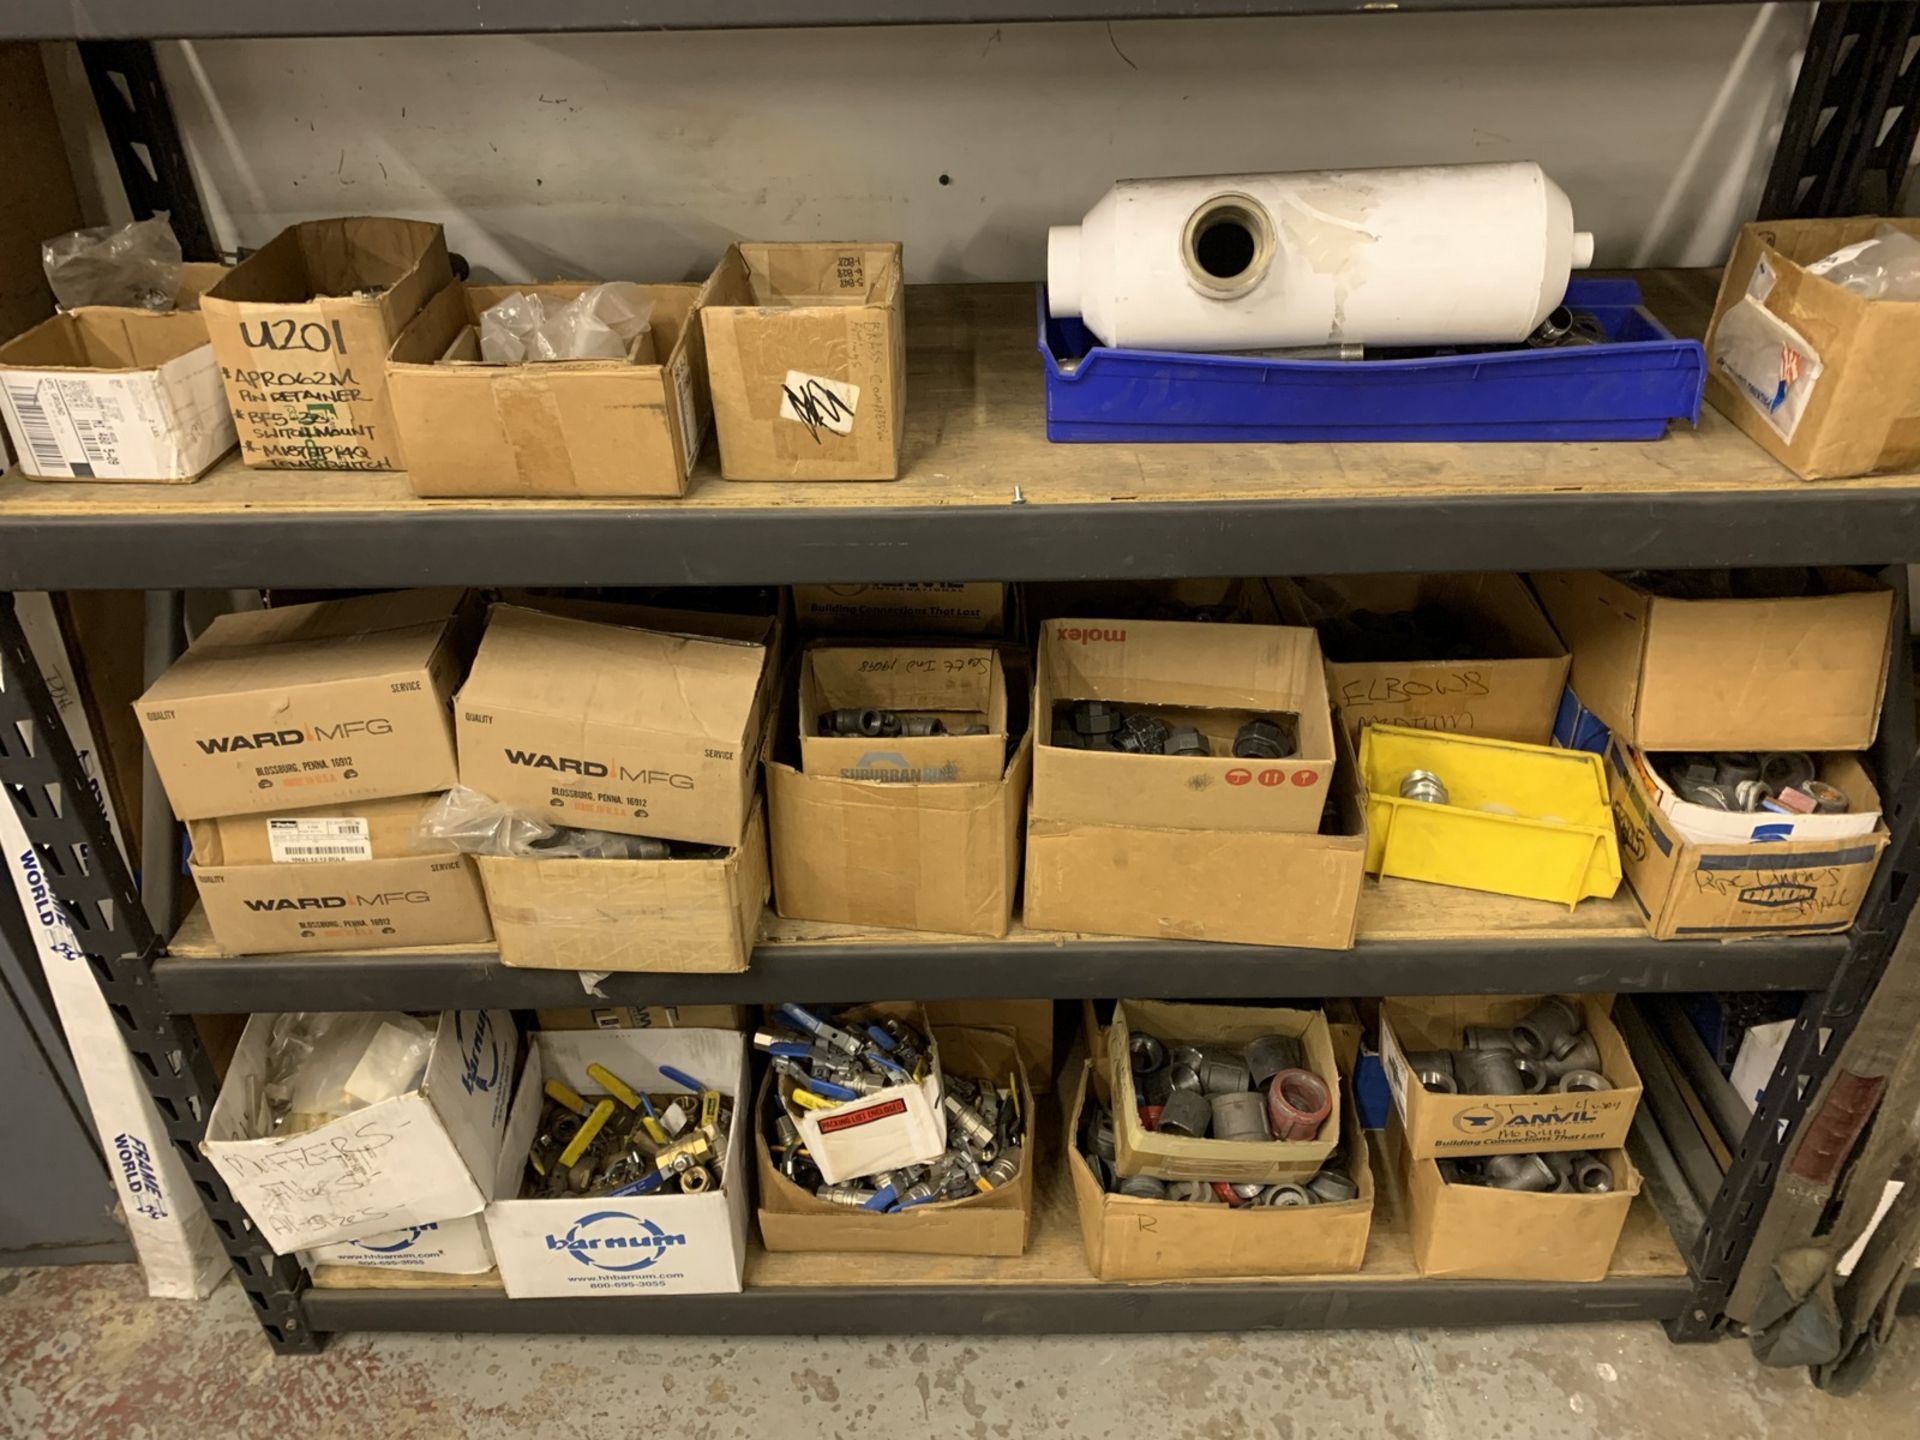 Contents of Shelving in Electrical and Plumbing Storage Area including Disconnects, Pipe Fittings, - Image 21 of 21